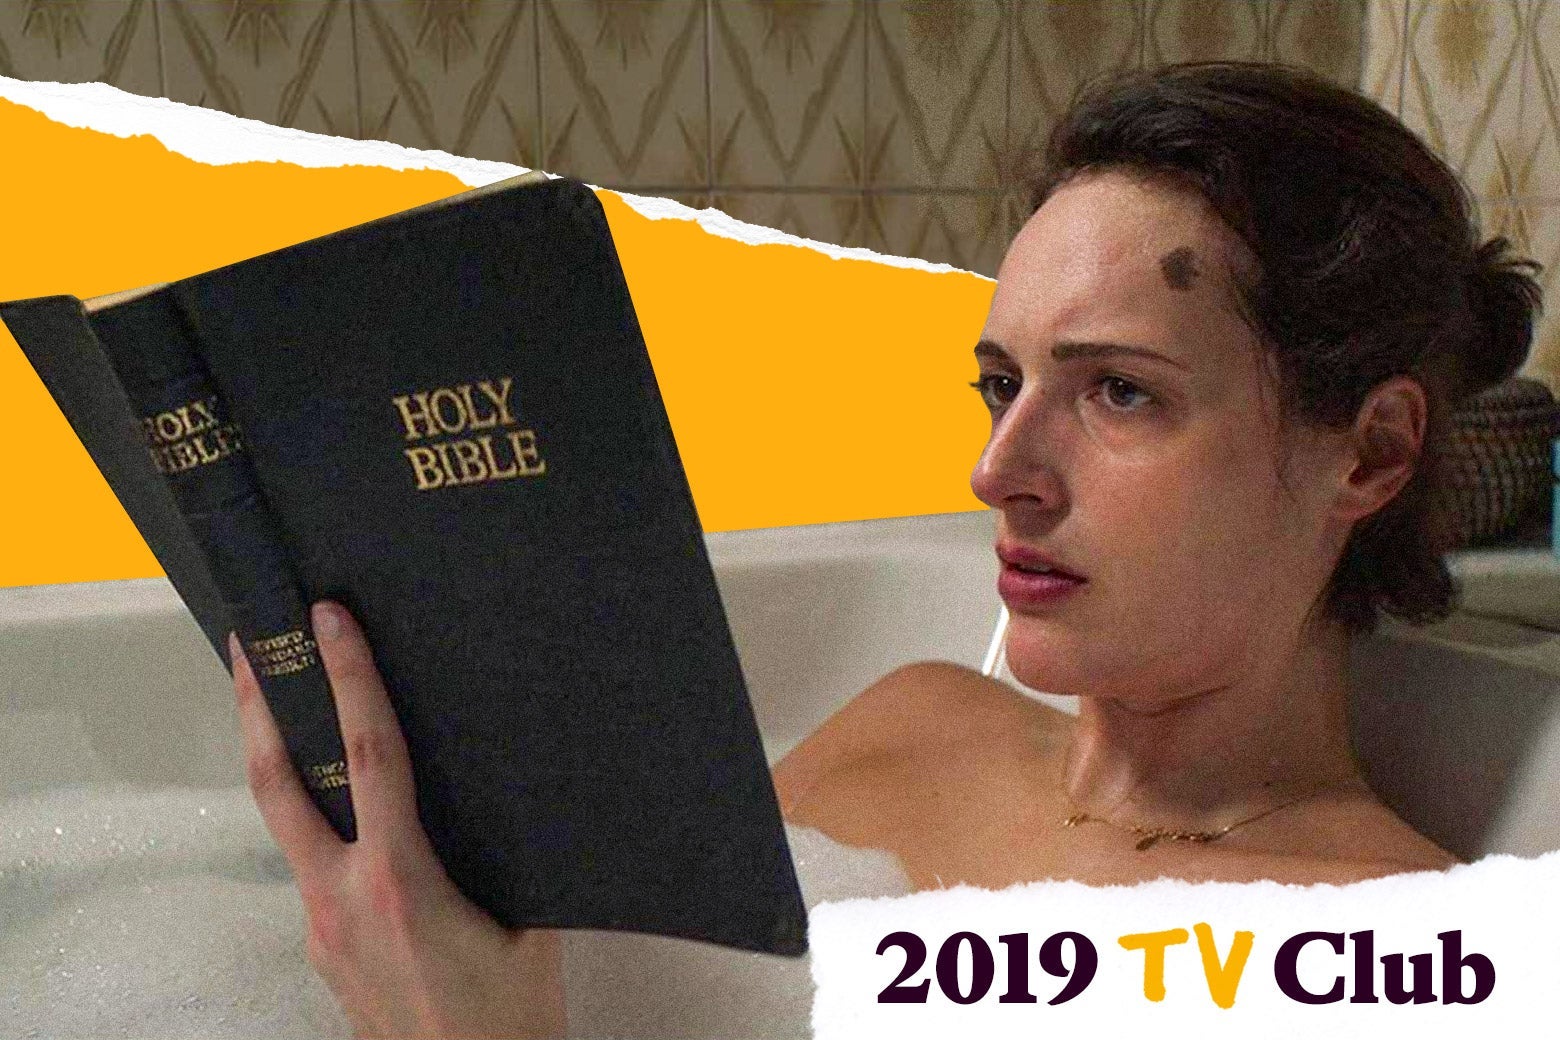 Phoebe Waller-Bridge reads the Holy Bible while taking a bath in this still from Fleabag.